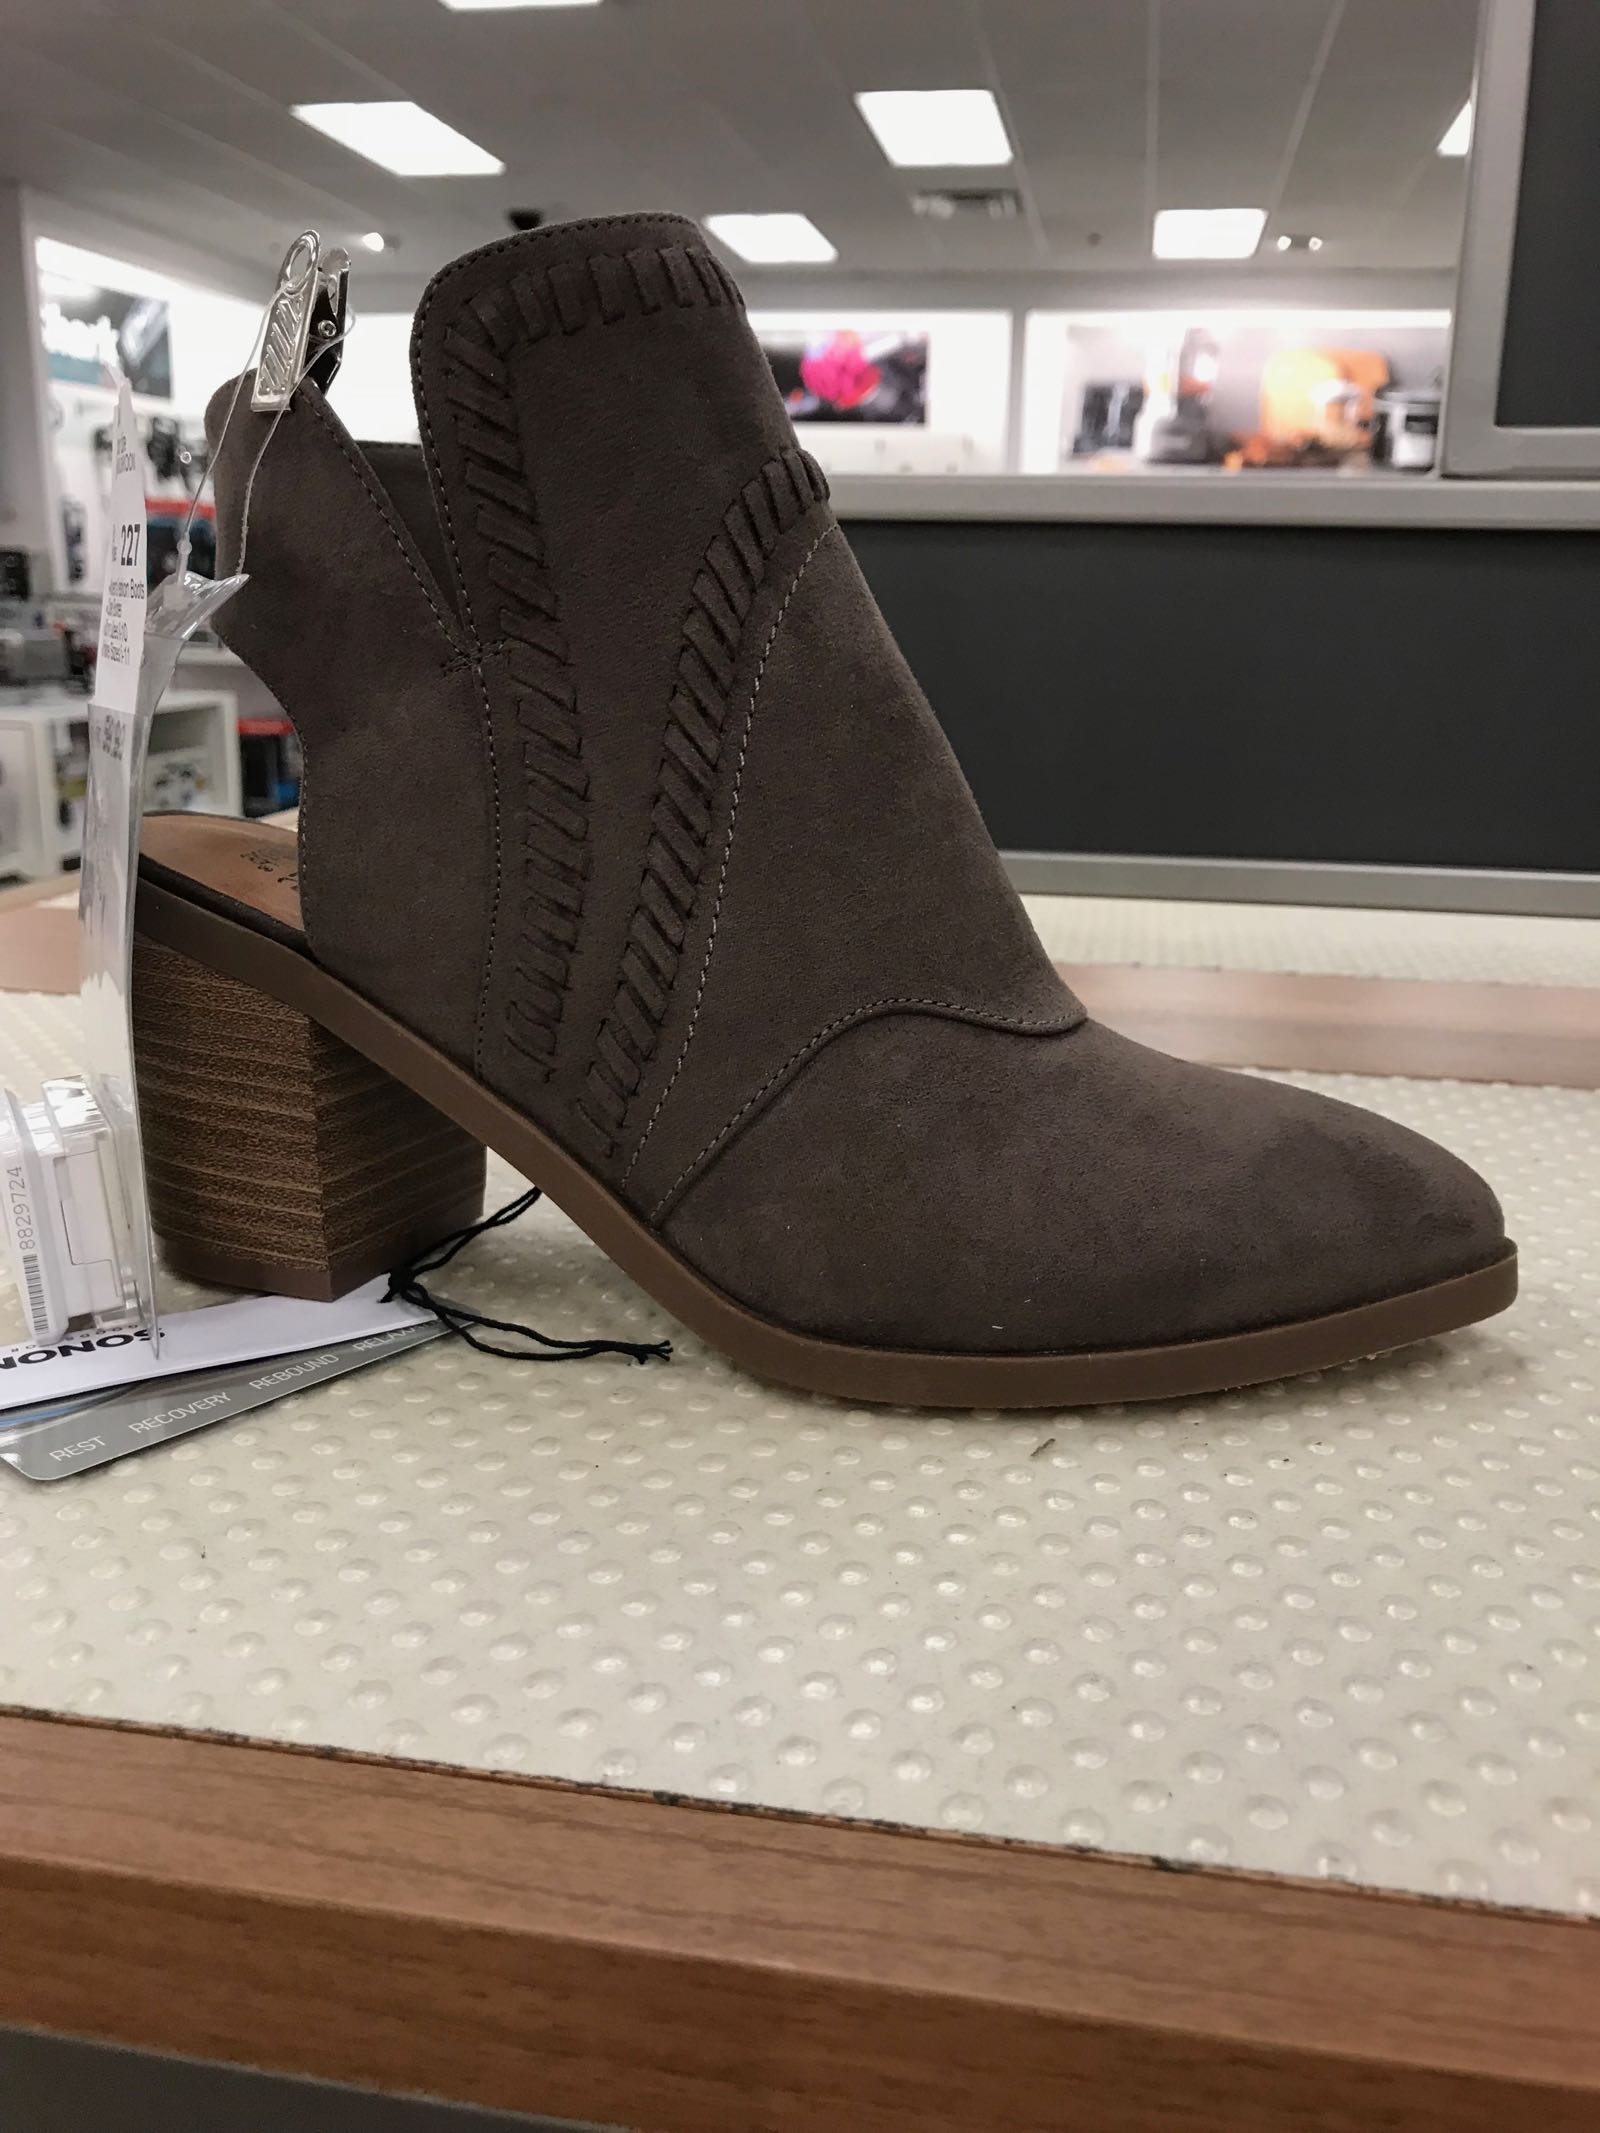 This blogger finds the cutest stuff at Kohl's - need these boots!